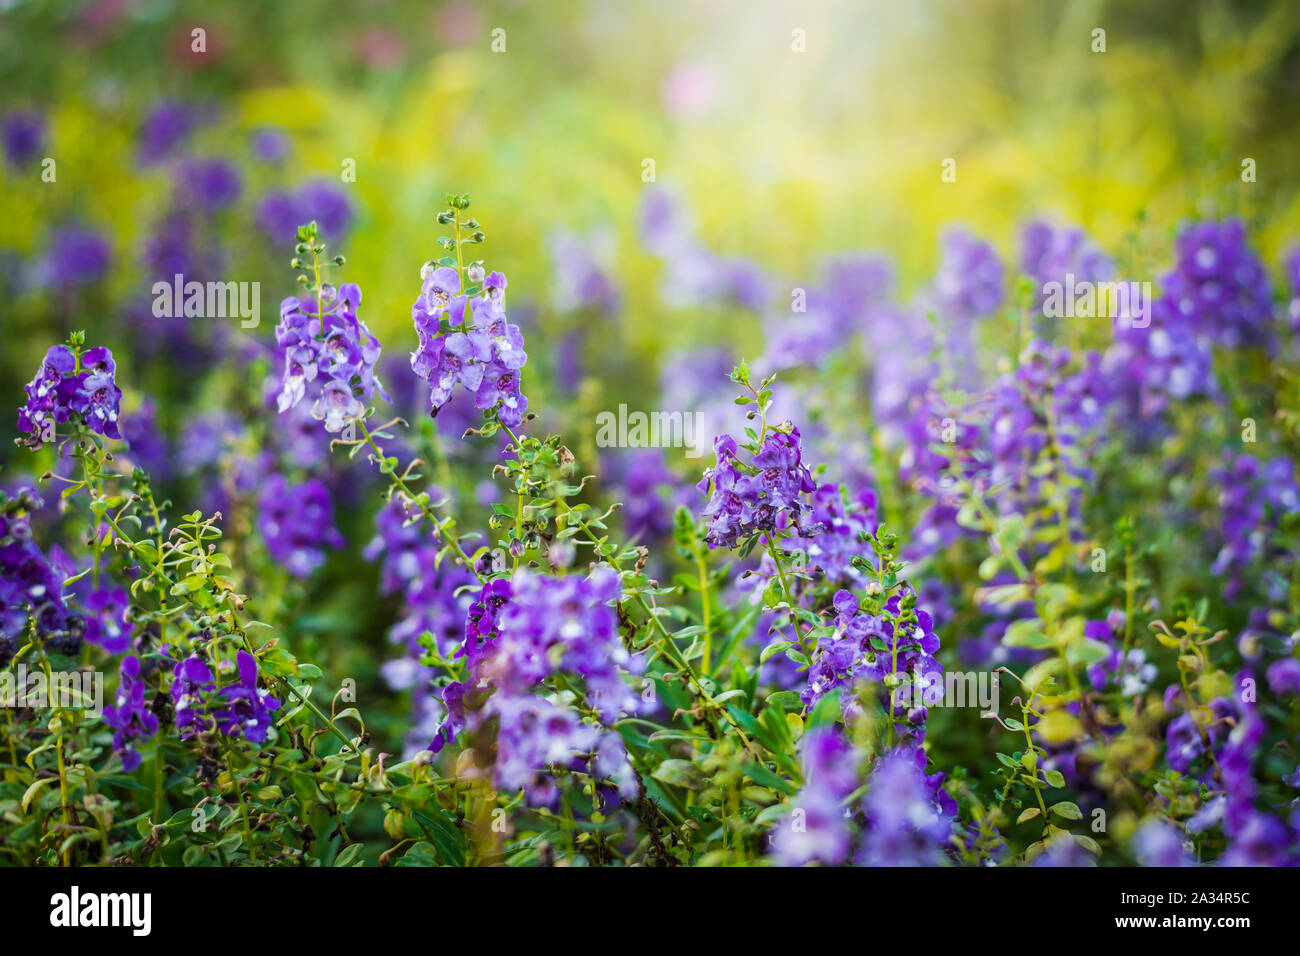 Angelonia goyazensis Benth flower in the meadow under sunlight Stock Photo